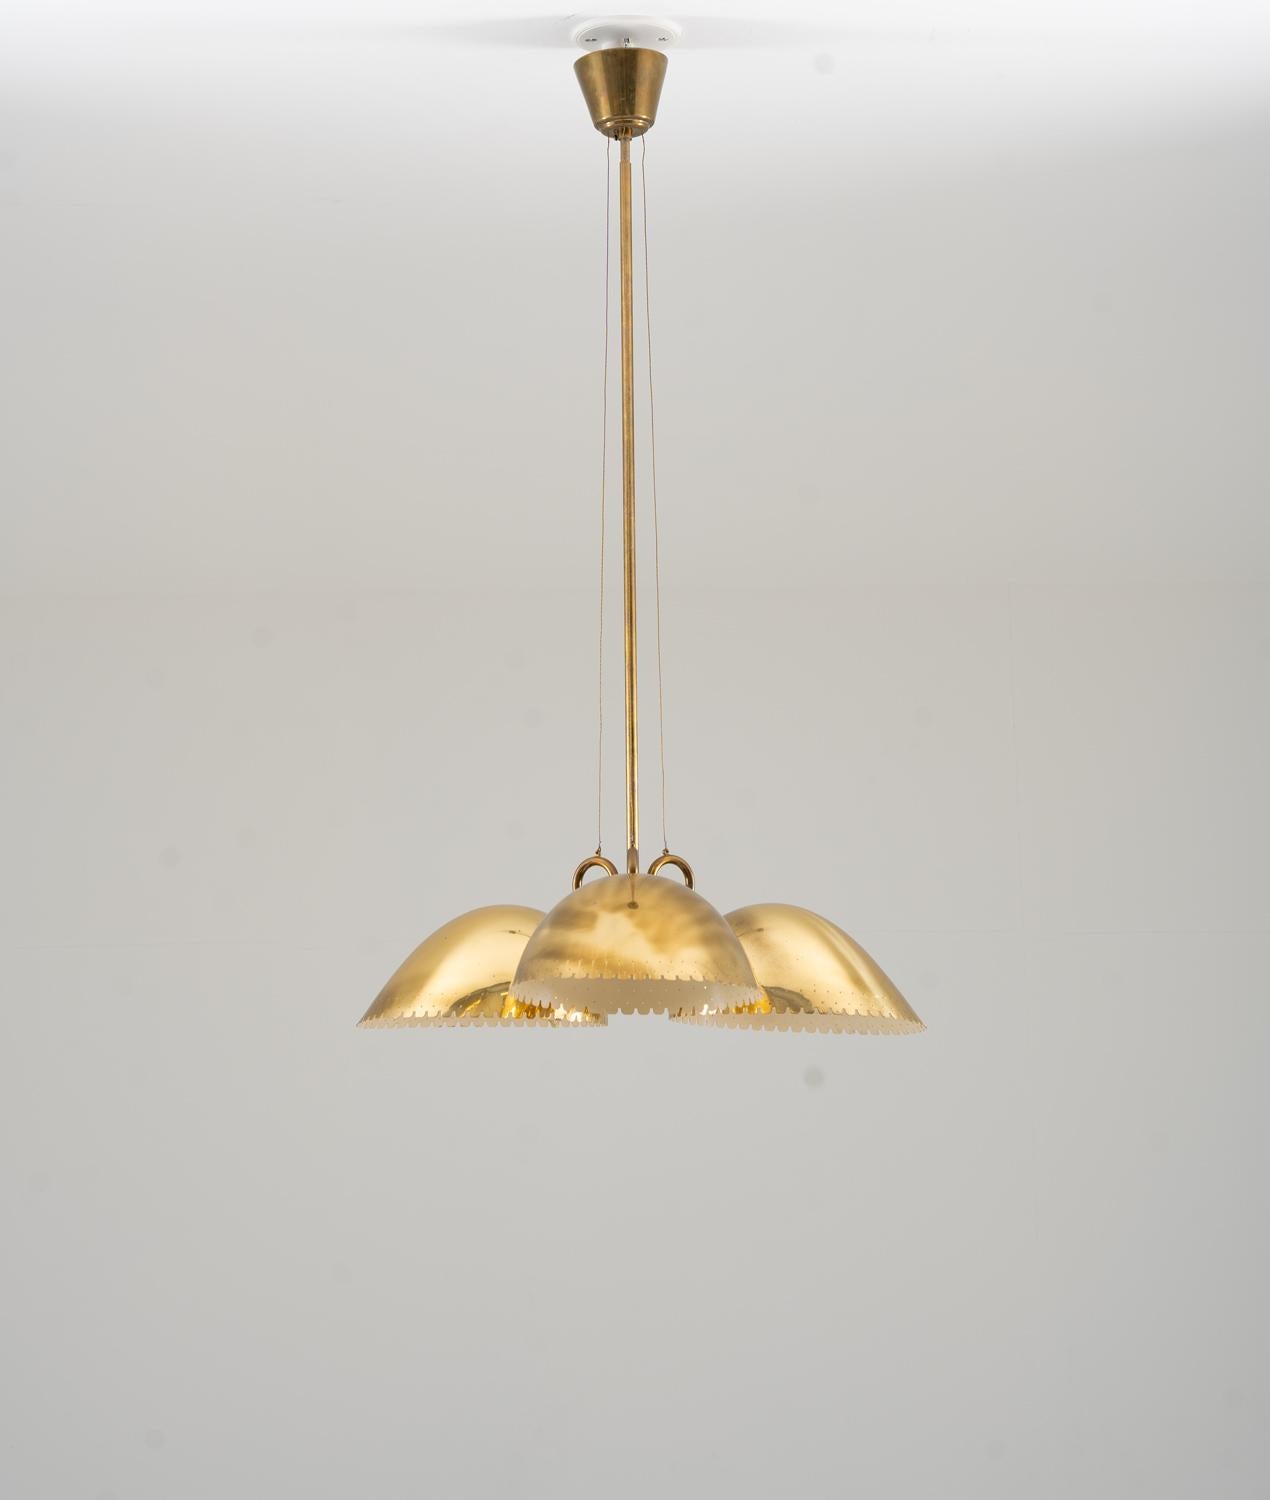 Swedish Modern pendant in brass, designed by Harald Notini and manufactured by Böhlmarks, Sweden, 1940s.
This impressive pendant is made with high quality and great details. It features three light sources, hidden by large perforated brass